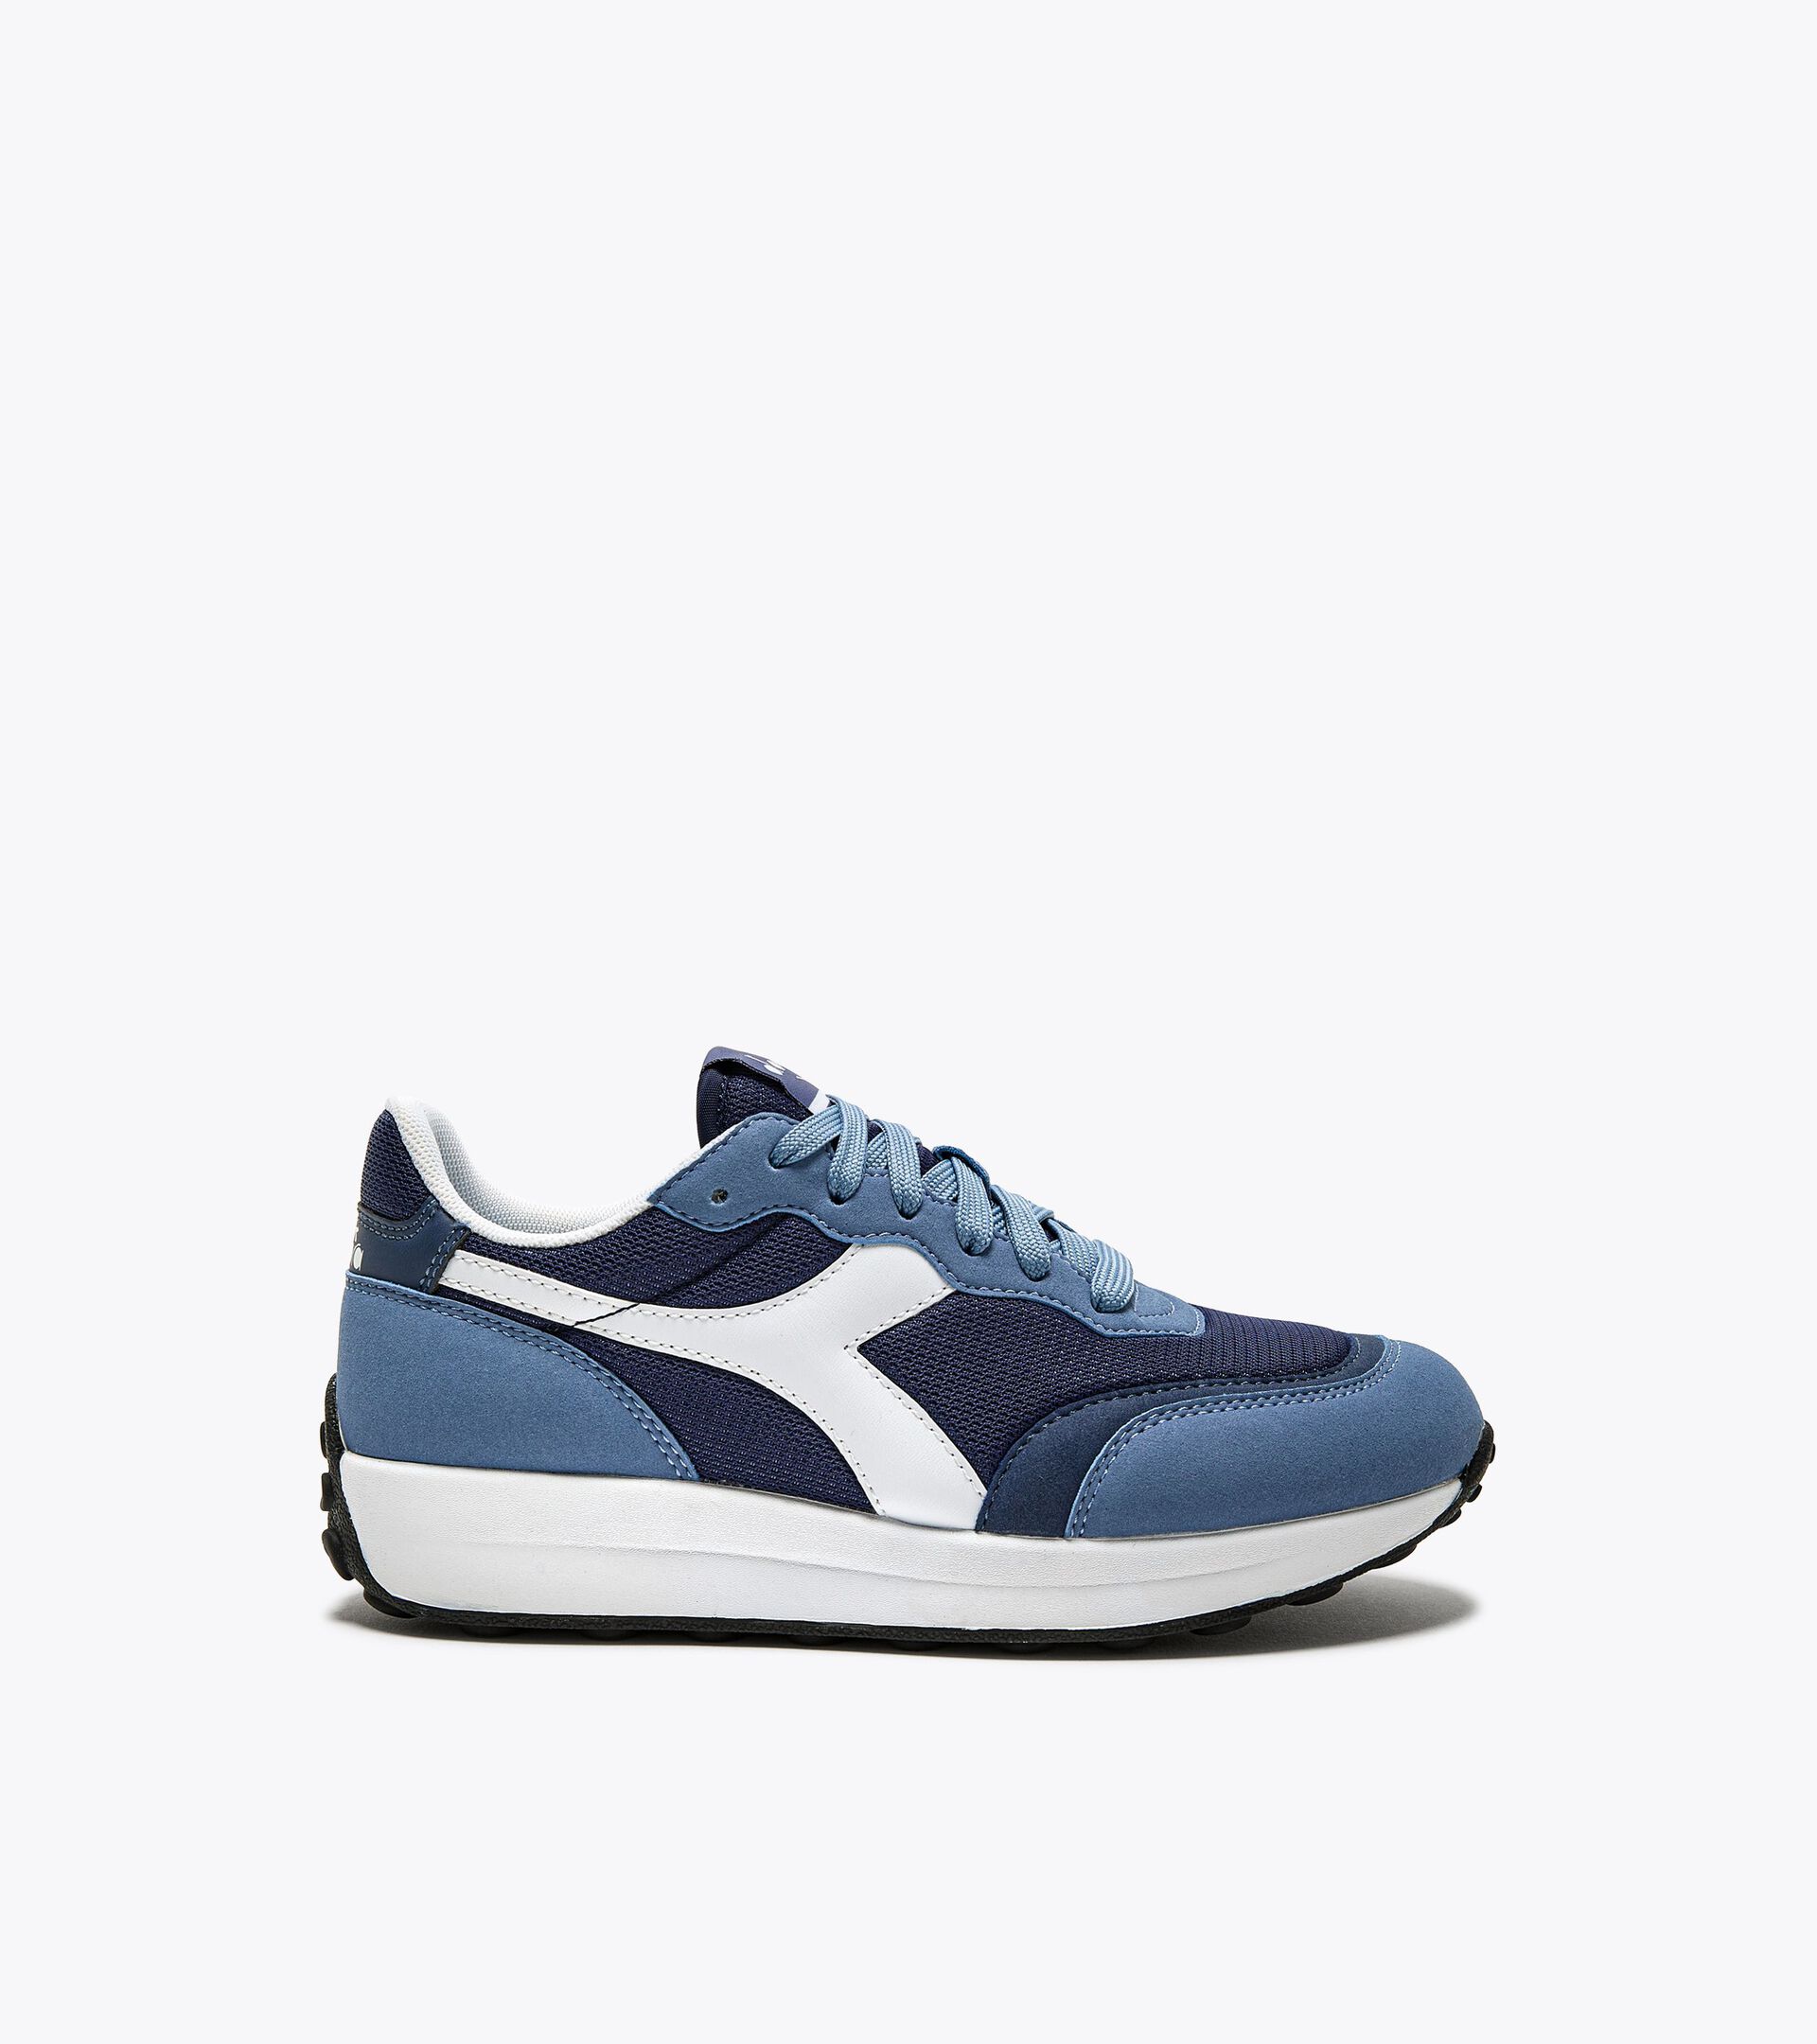 Sports shoes - Youth 8-16 years - Gender Neutral RACE GS STONEWASH/WHITE - Diadora